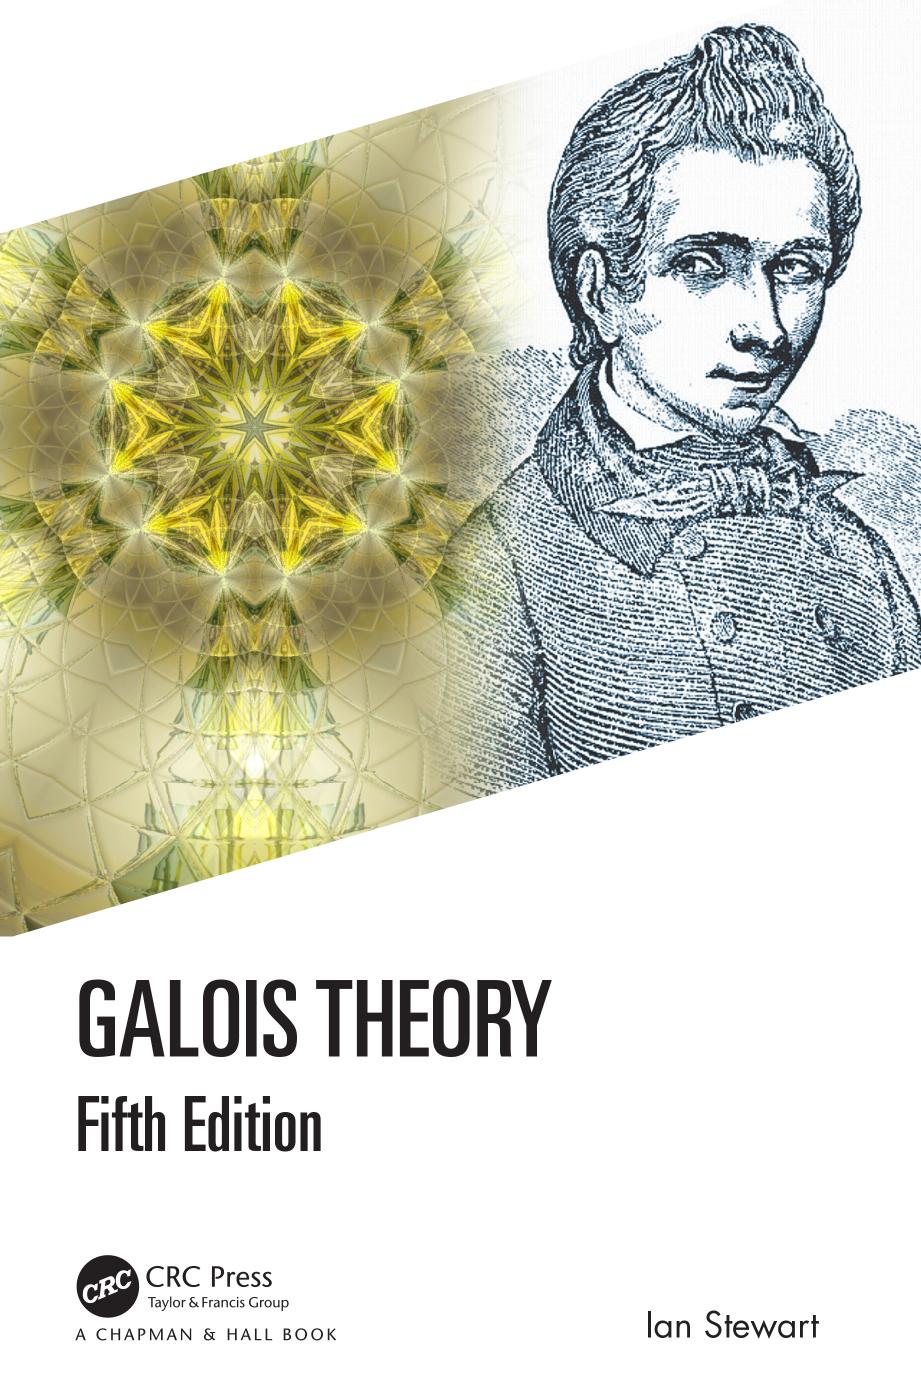 Galois Theory: Fifth Edition